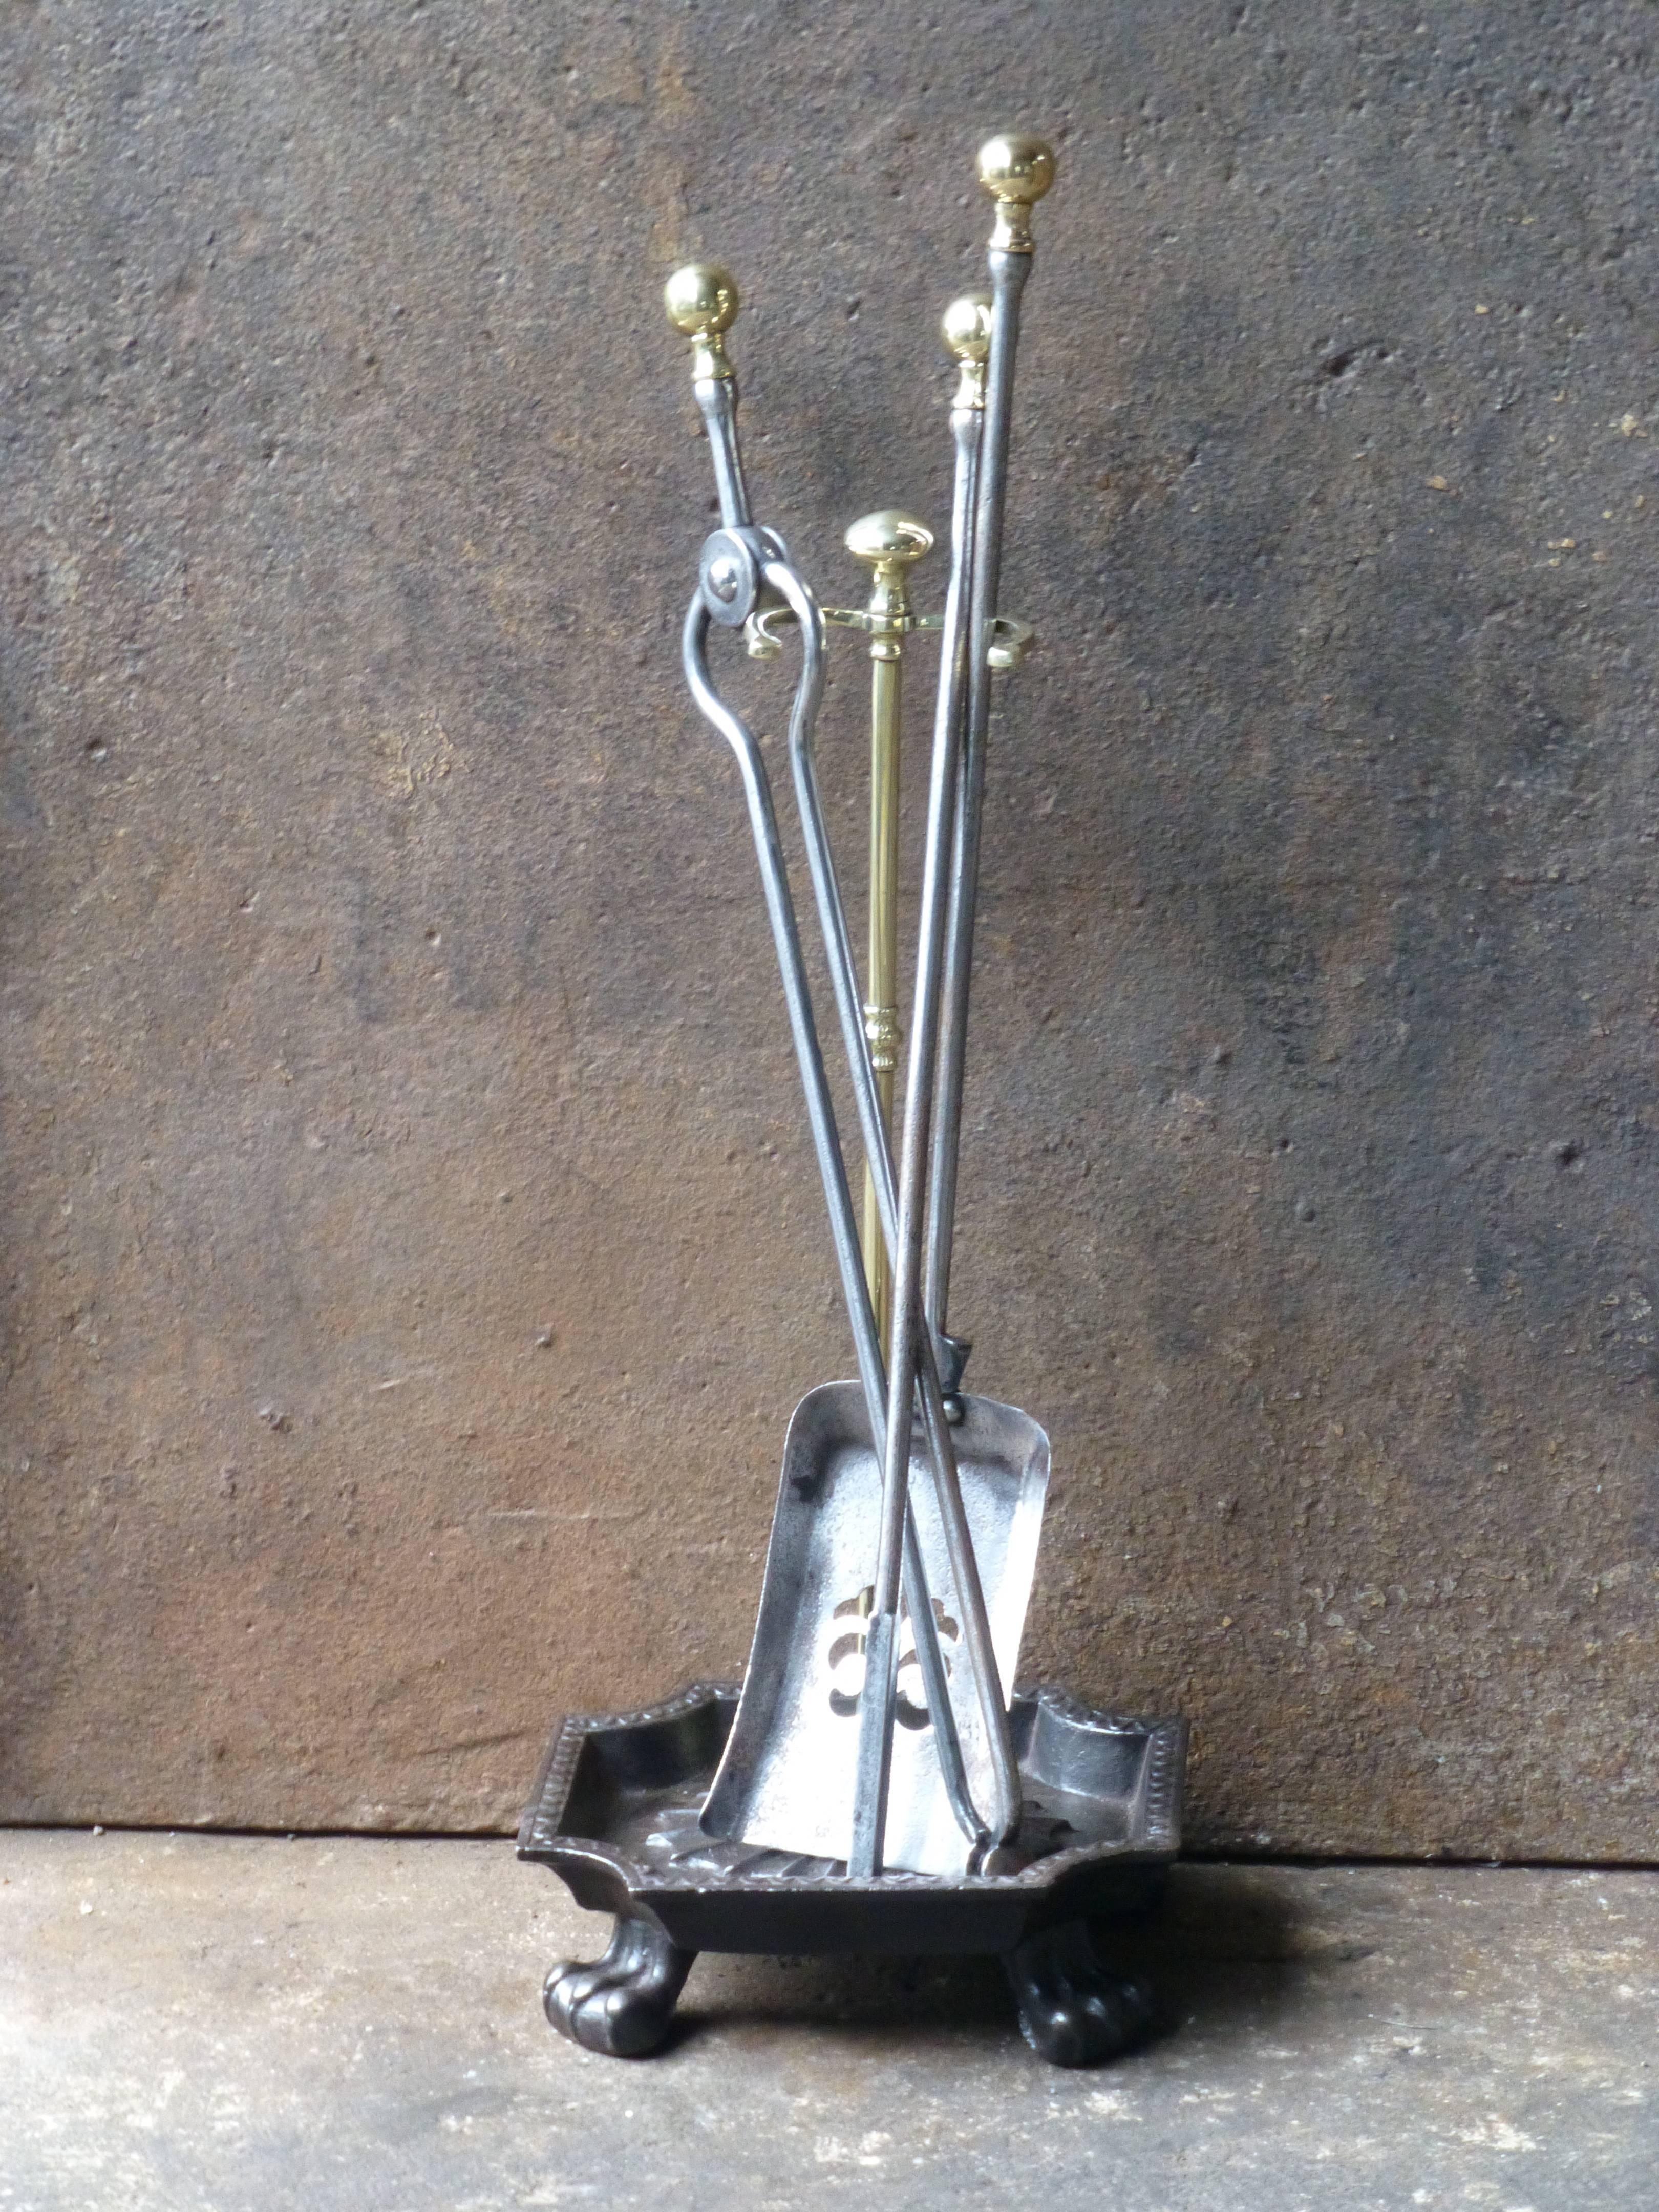 19th century English fireplace tool set, fire irons made of polished steel and polished brass. The style is Victorian and it is from that period. The condition is good.

